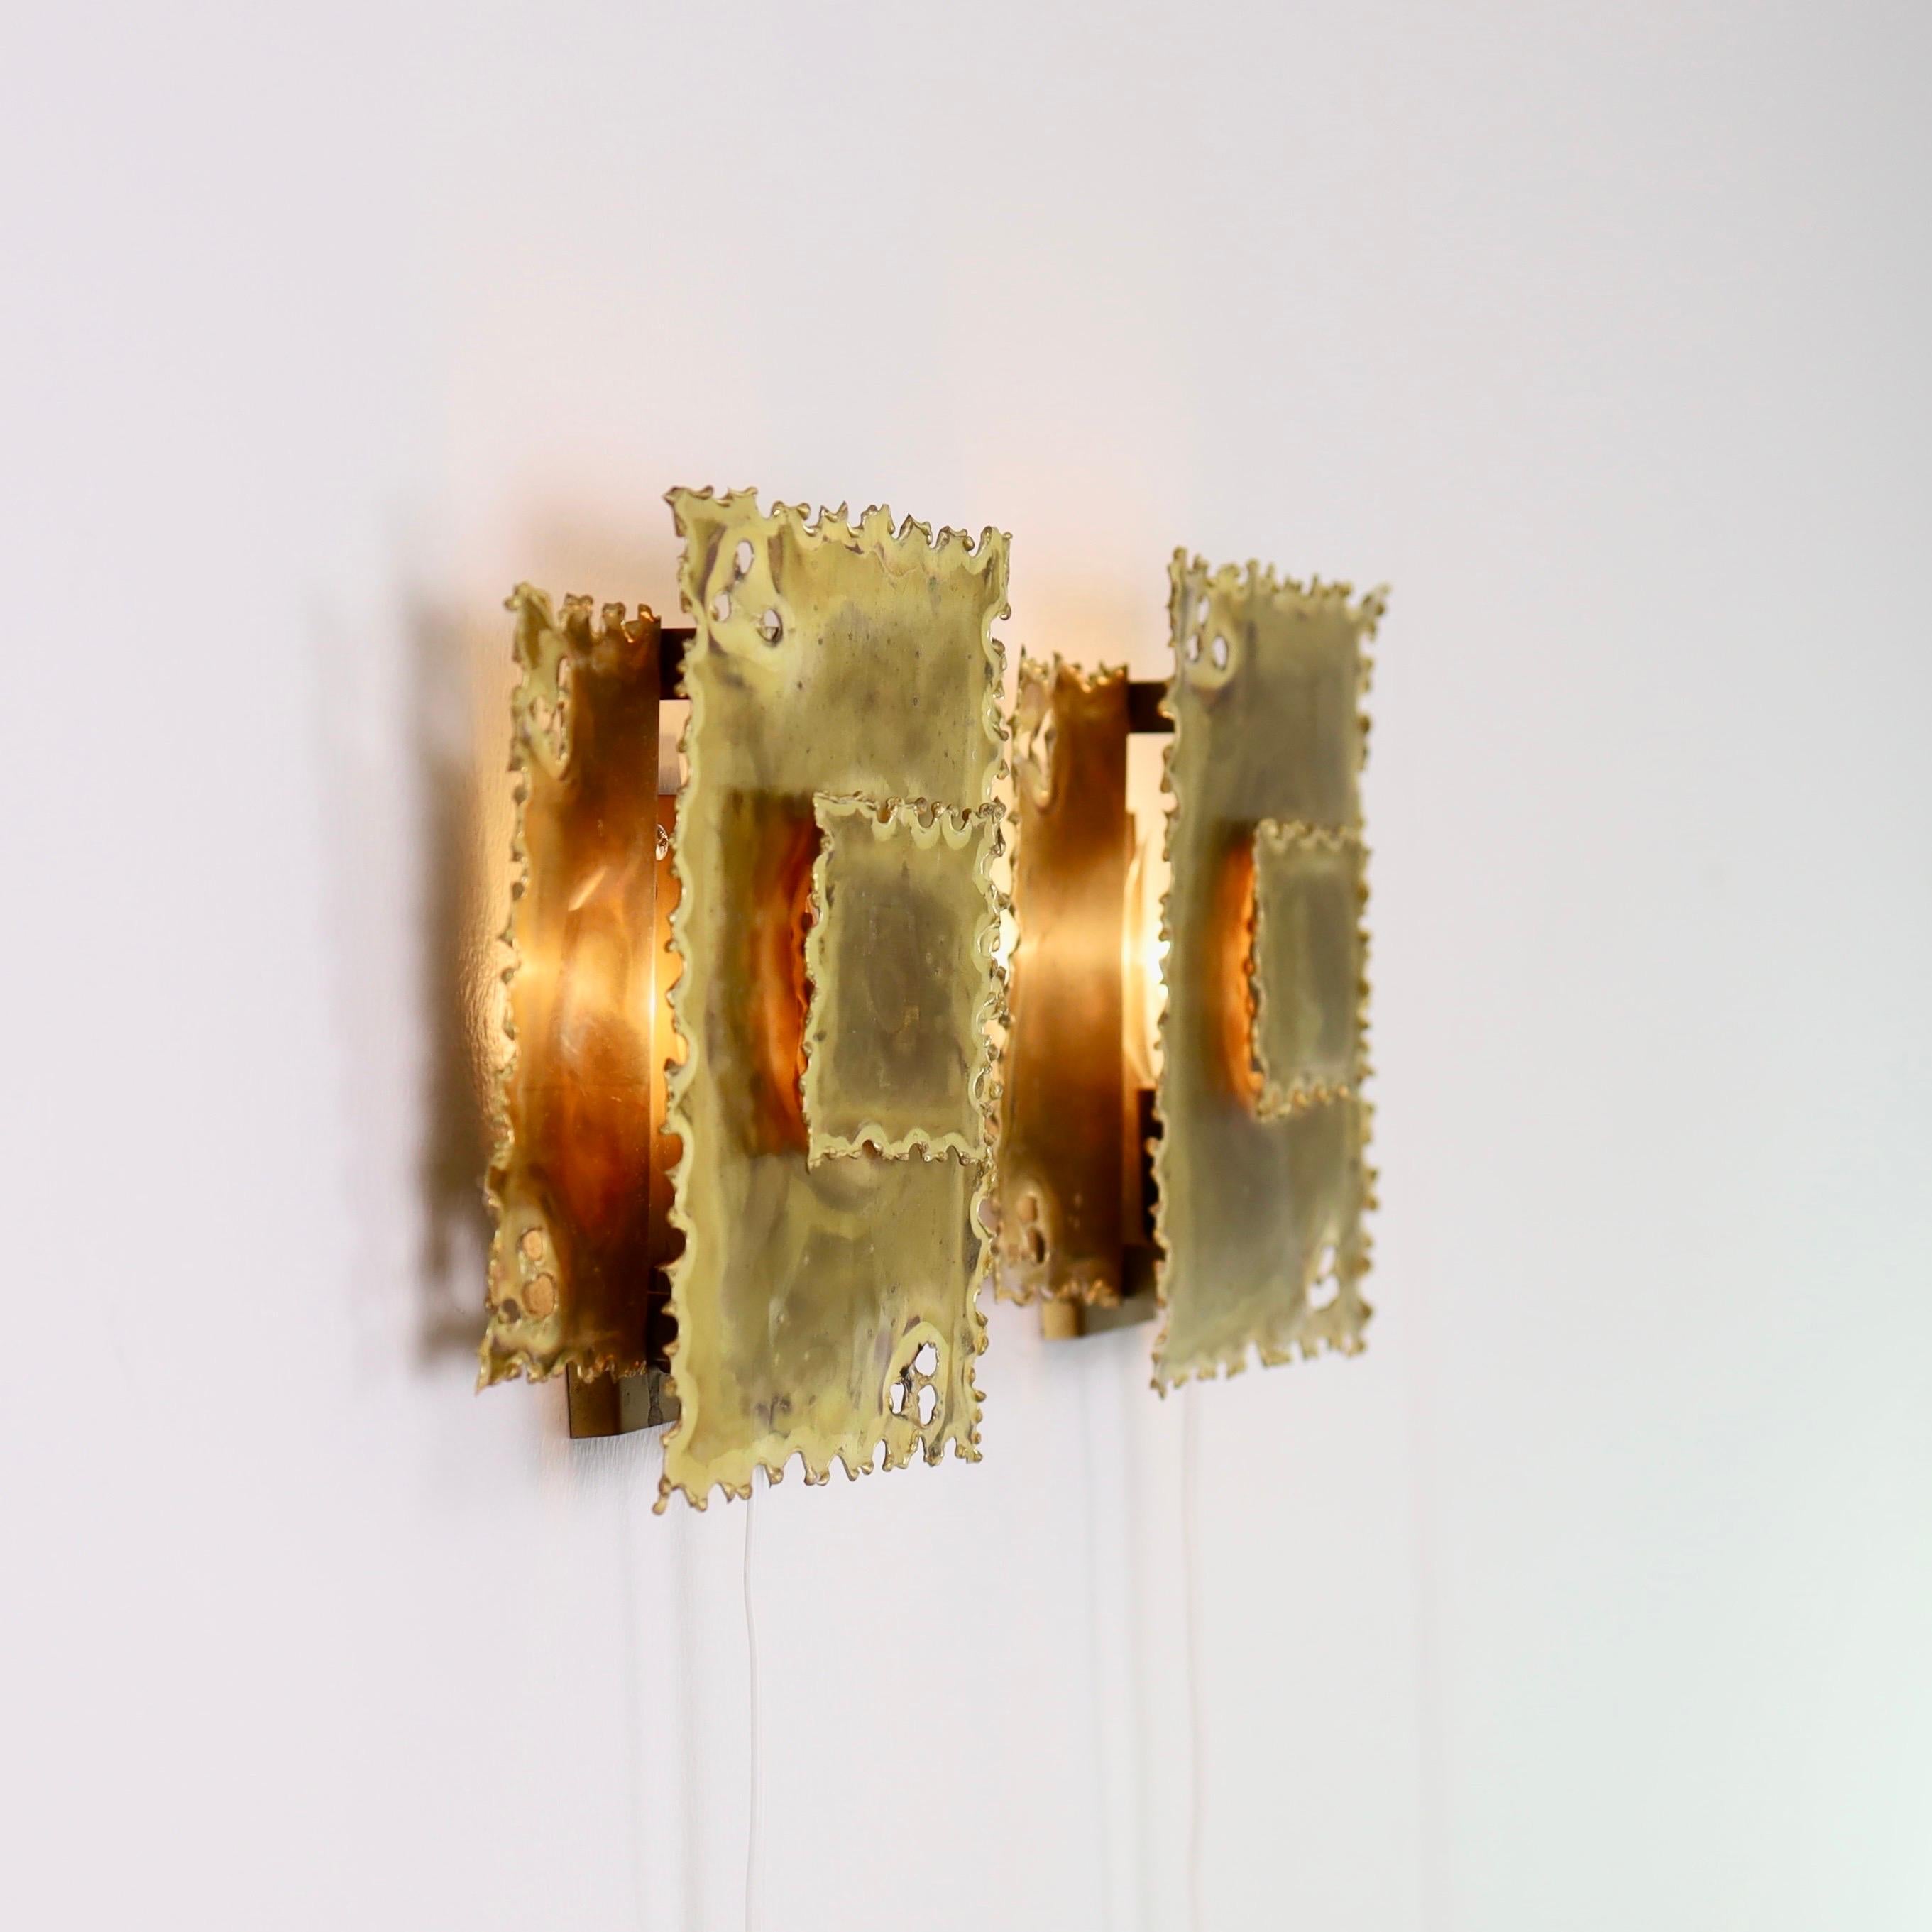 Pair of Square Brass Wall Lamps by Svend Aage Holm Sorensen, 1960s, Denmark For Sale 5